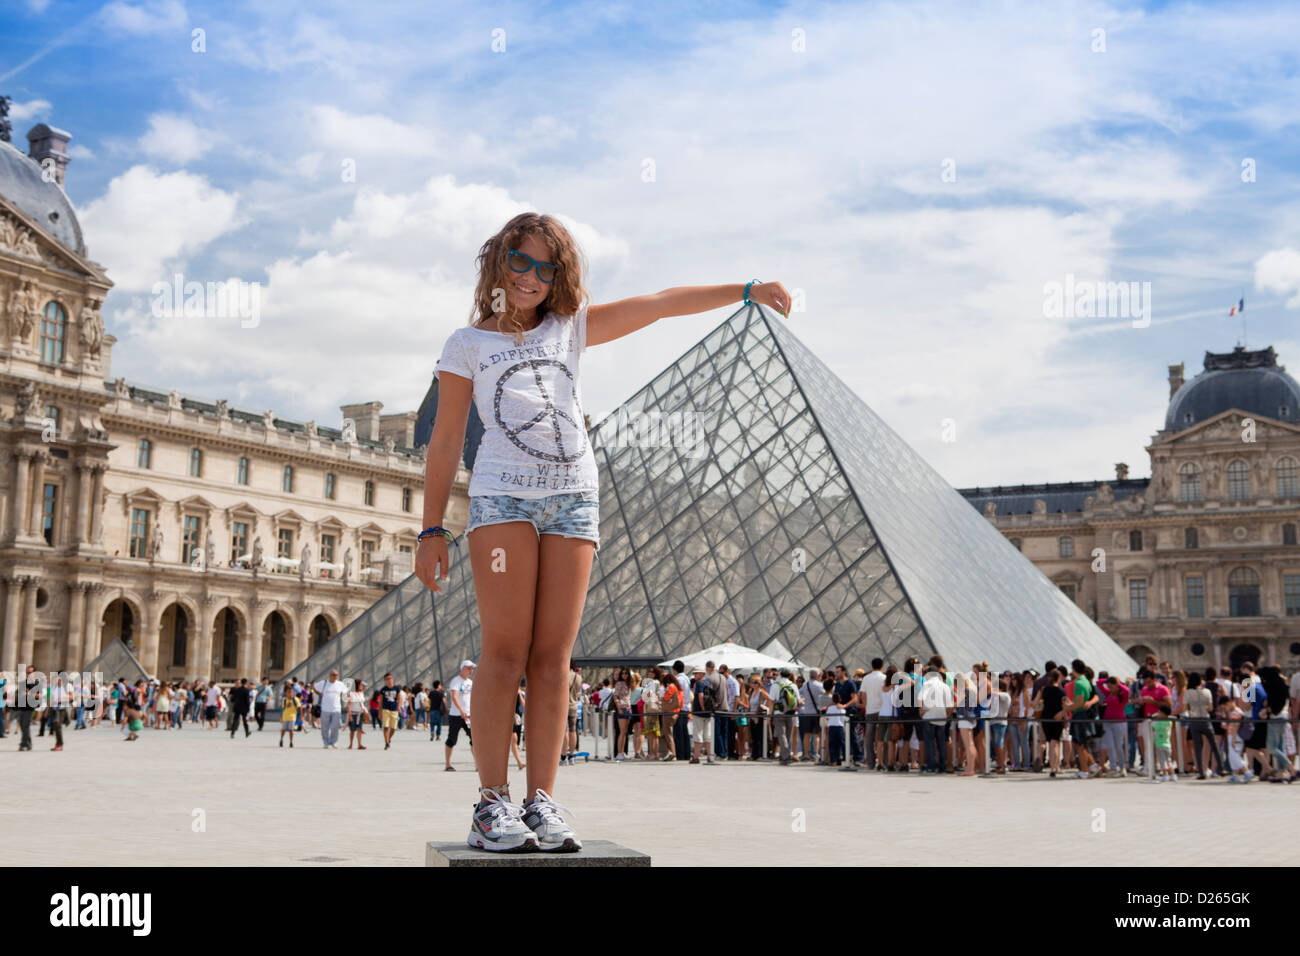 Touristic shot of the Louvre Pyramid pretending to have hand on top of it. Paris, France Stock Photo